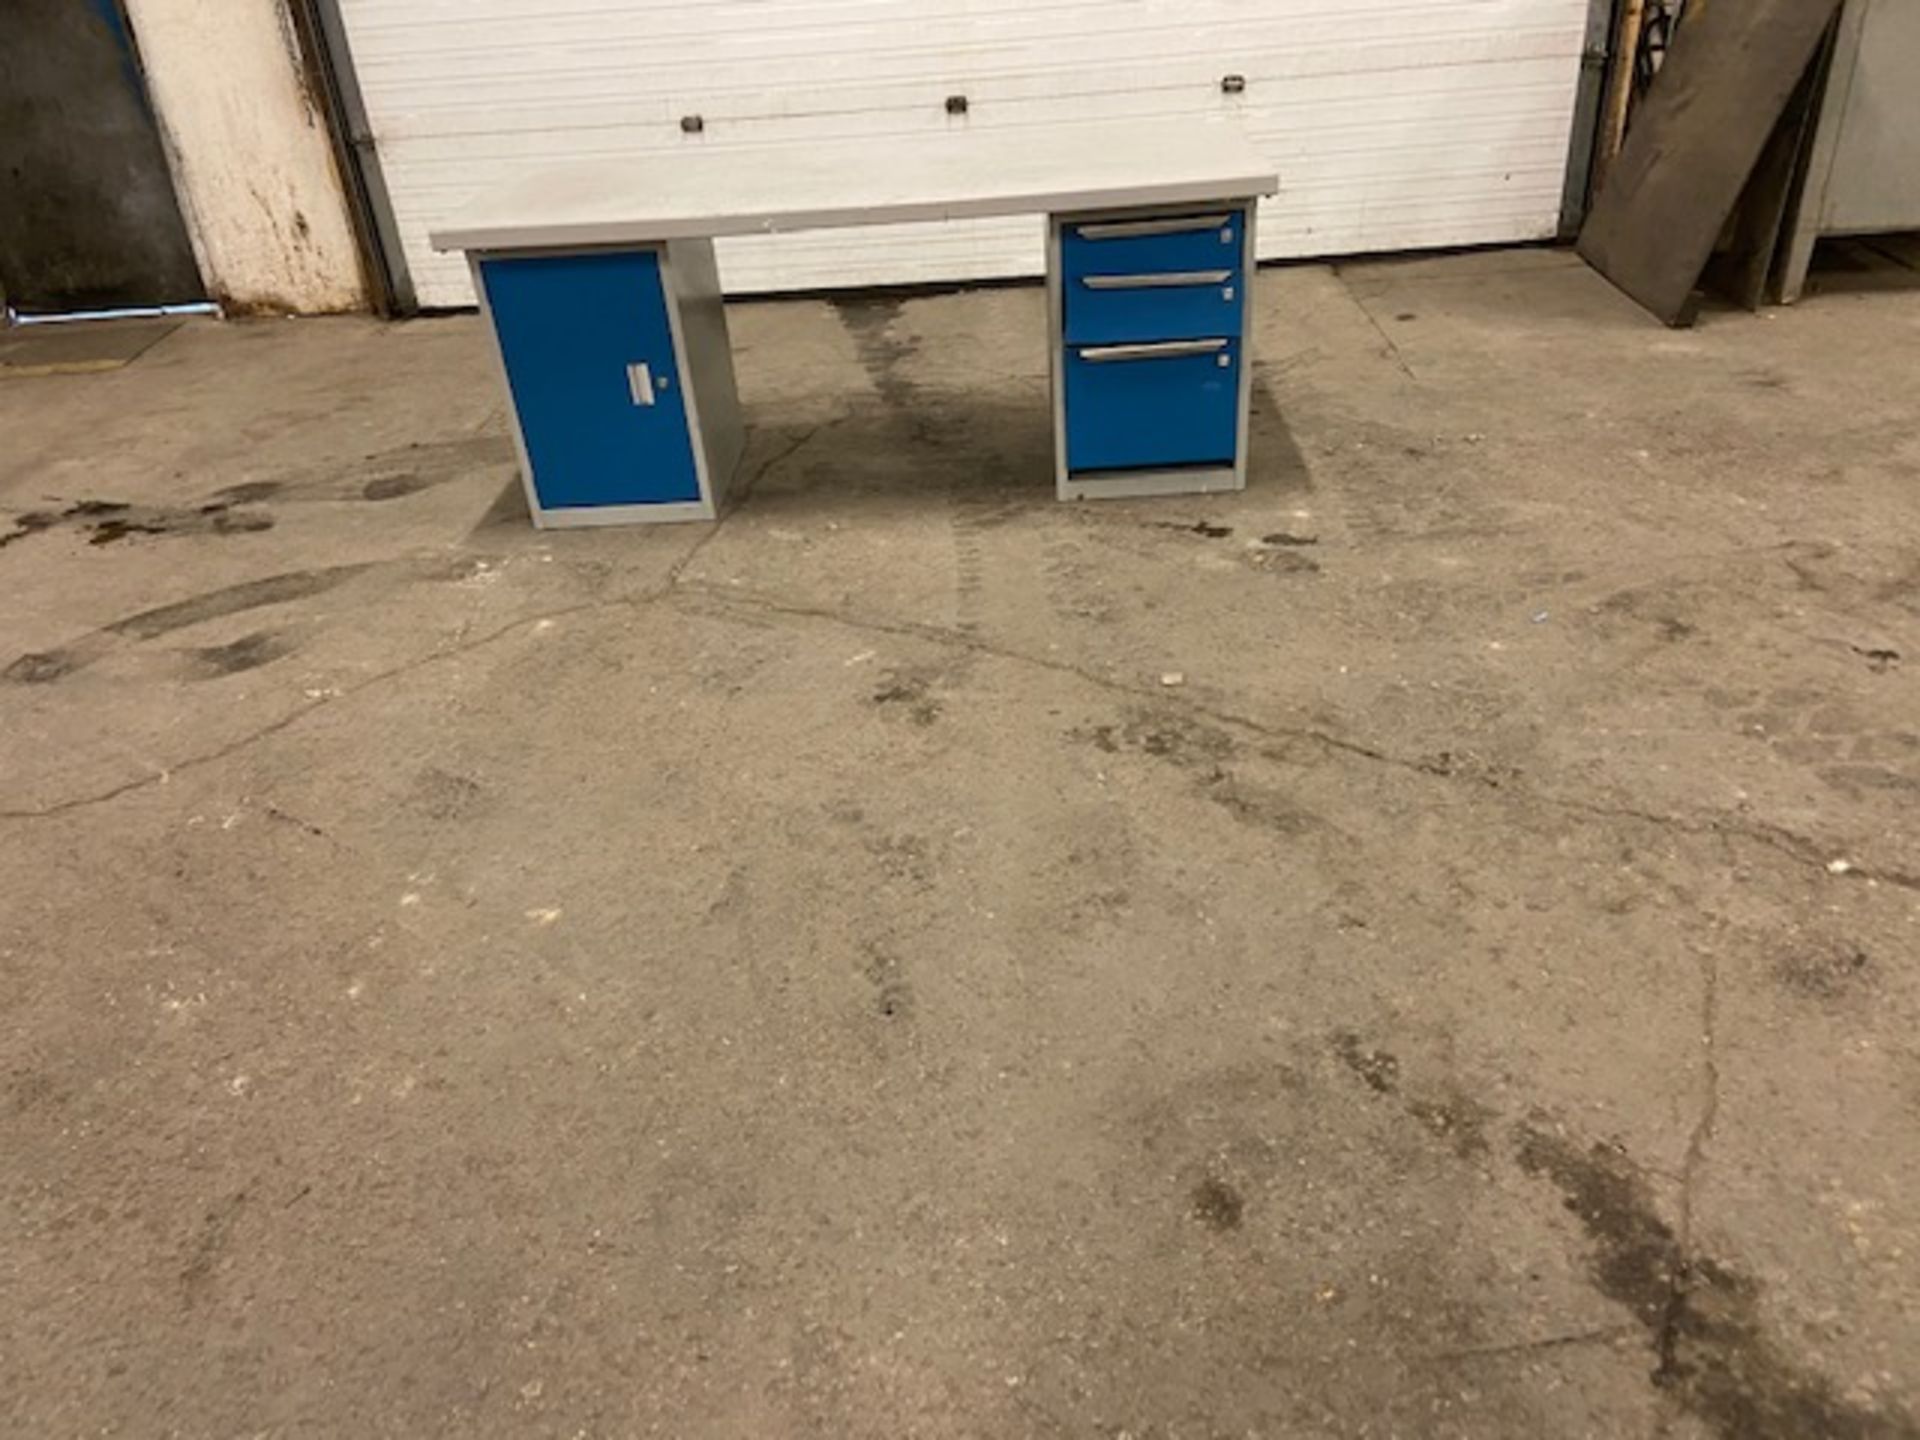 Work Table Work Bench Unit 72" x 30" with drawers & cabinet on sides